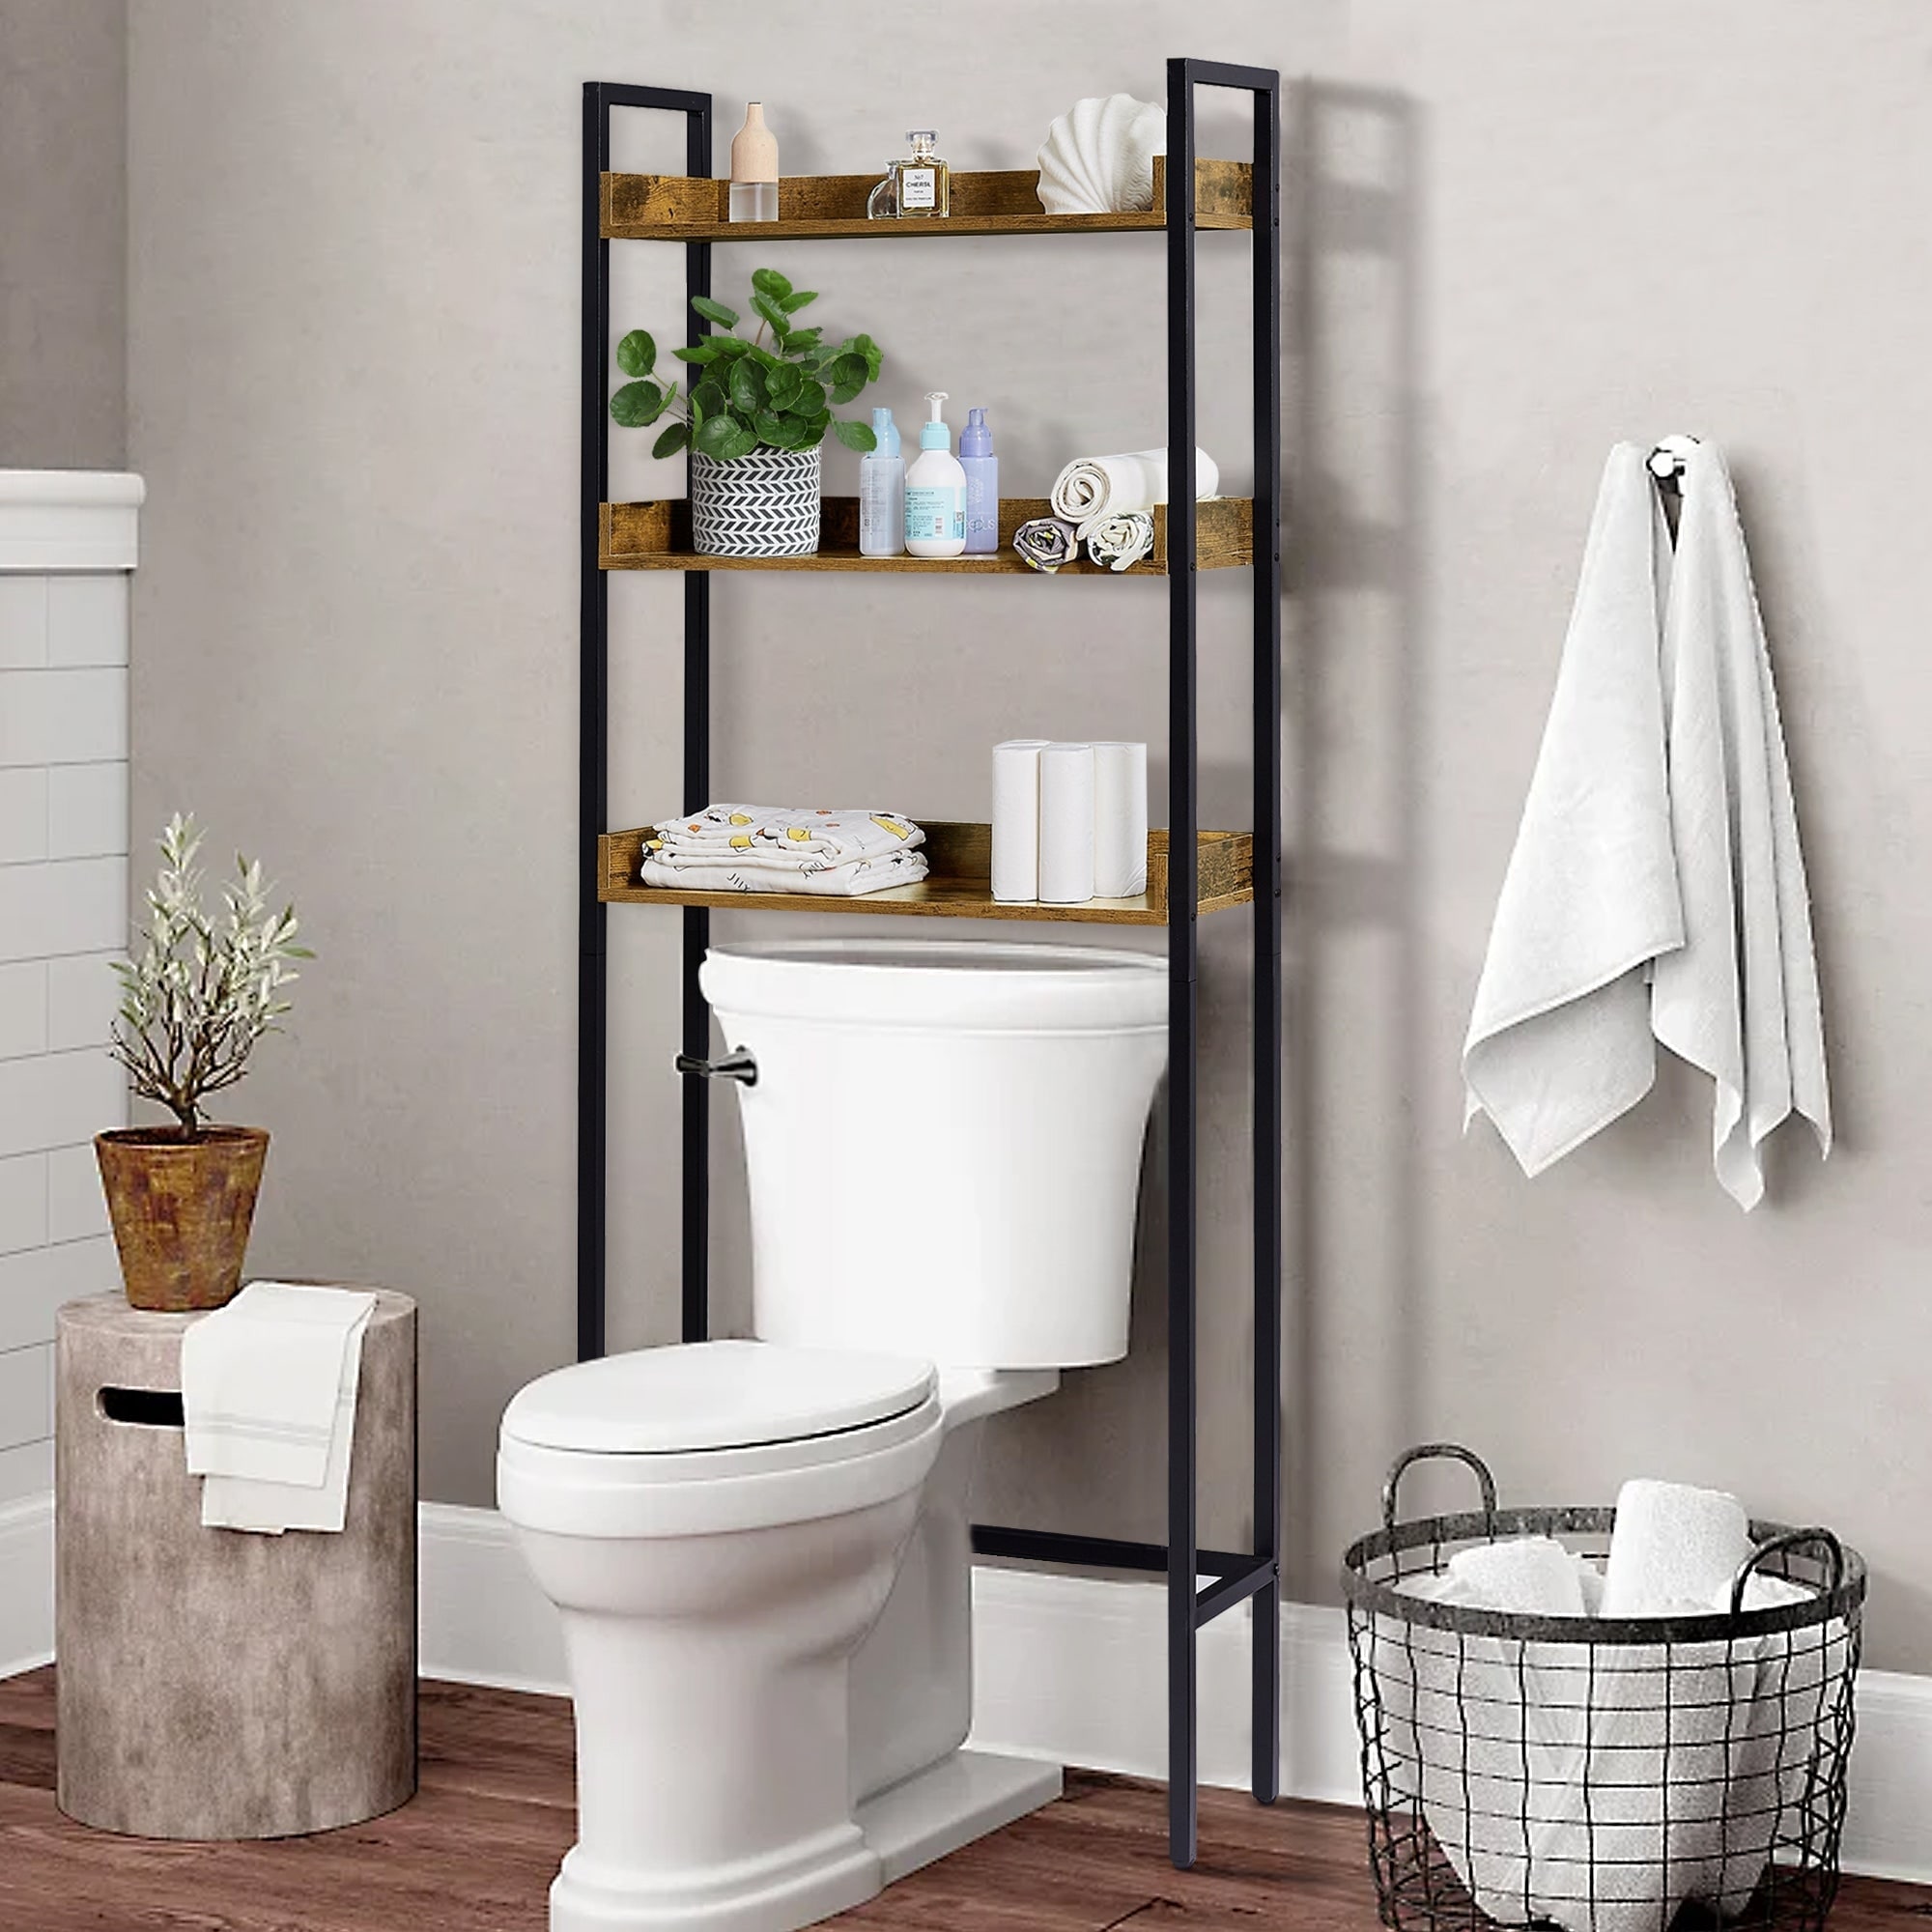 https://ak1.ostkcdn.com/images/products/is/images/direct/37ab6141e3109291c975c9eae64ae5fb62c5fb51/VECELO-Small-Bathroom-Shelf-Over-The-Toilet%2C-Slim-Toilet-Paper-Holder-with-3-Shelves.jpg